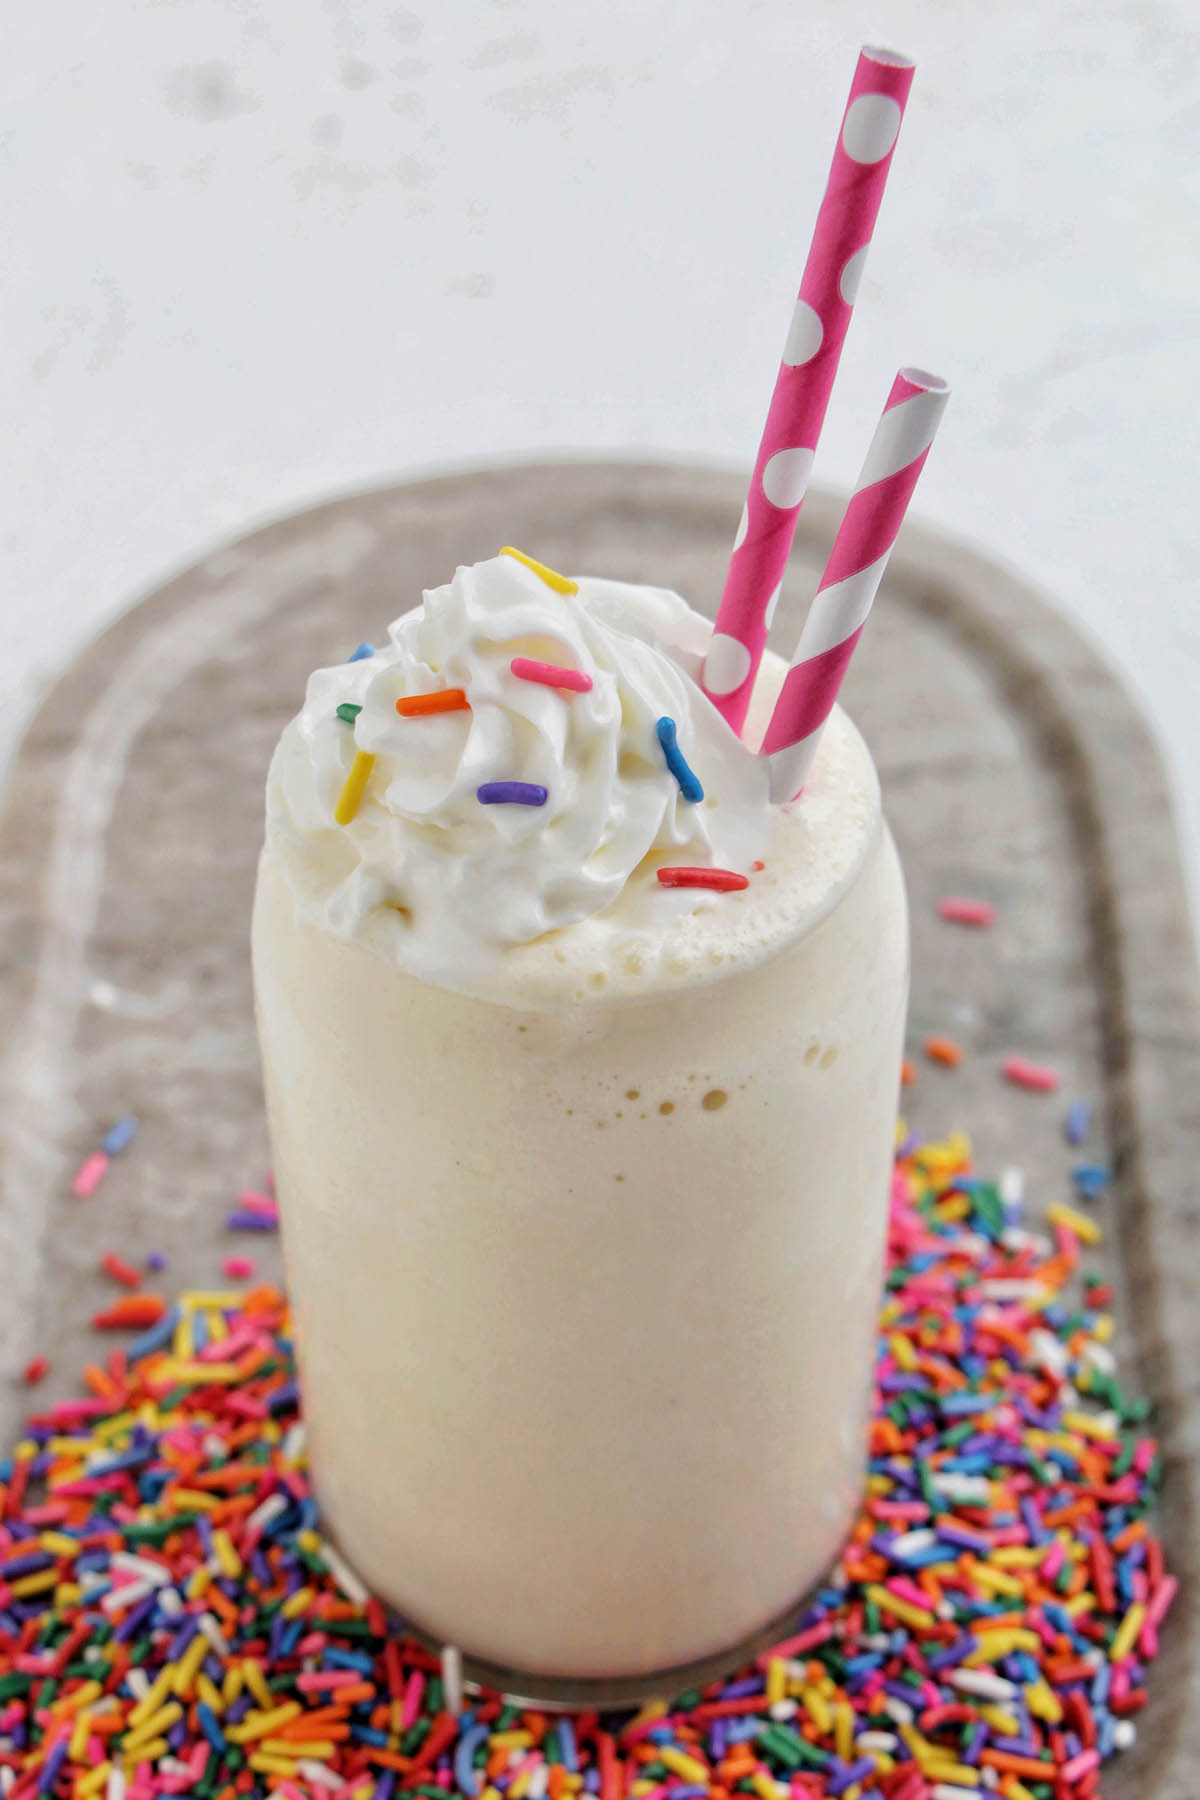 vanilla milkshake topped with whipped cream and sprinkles.